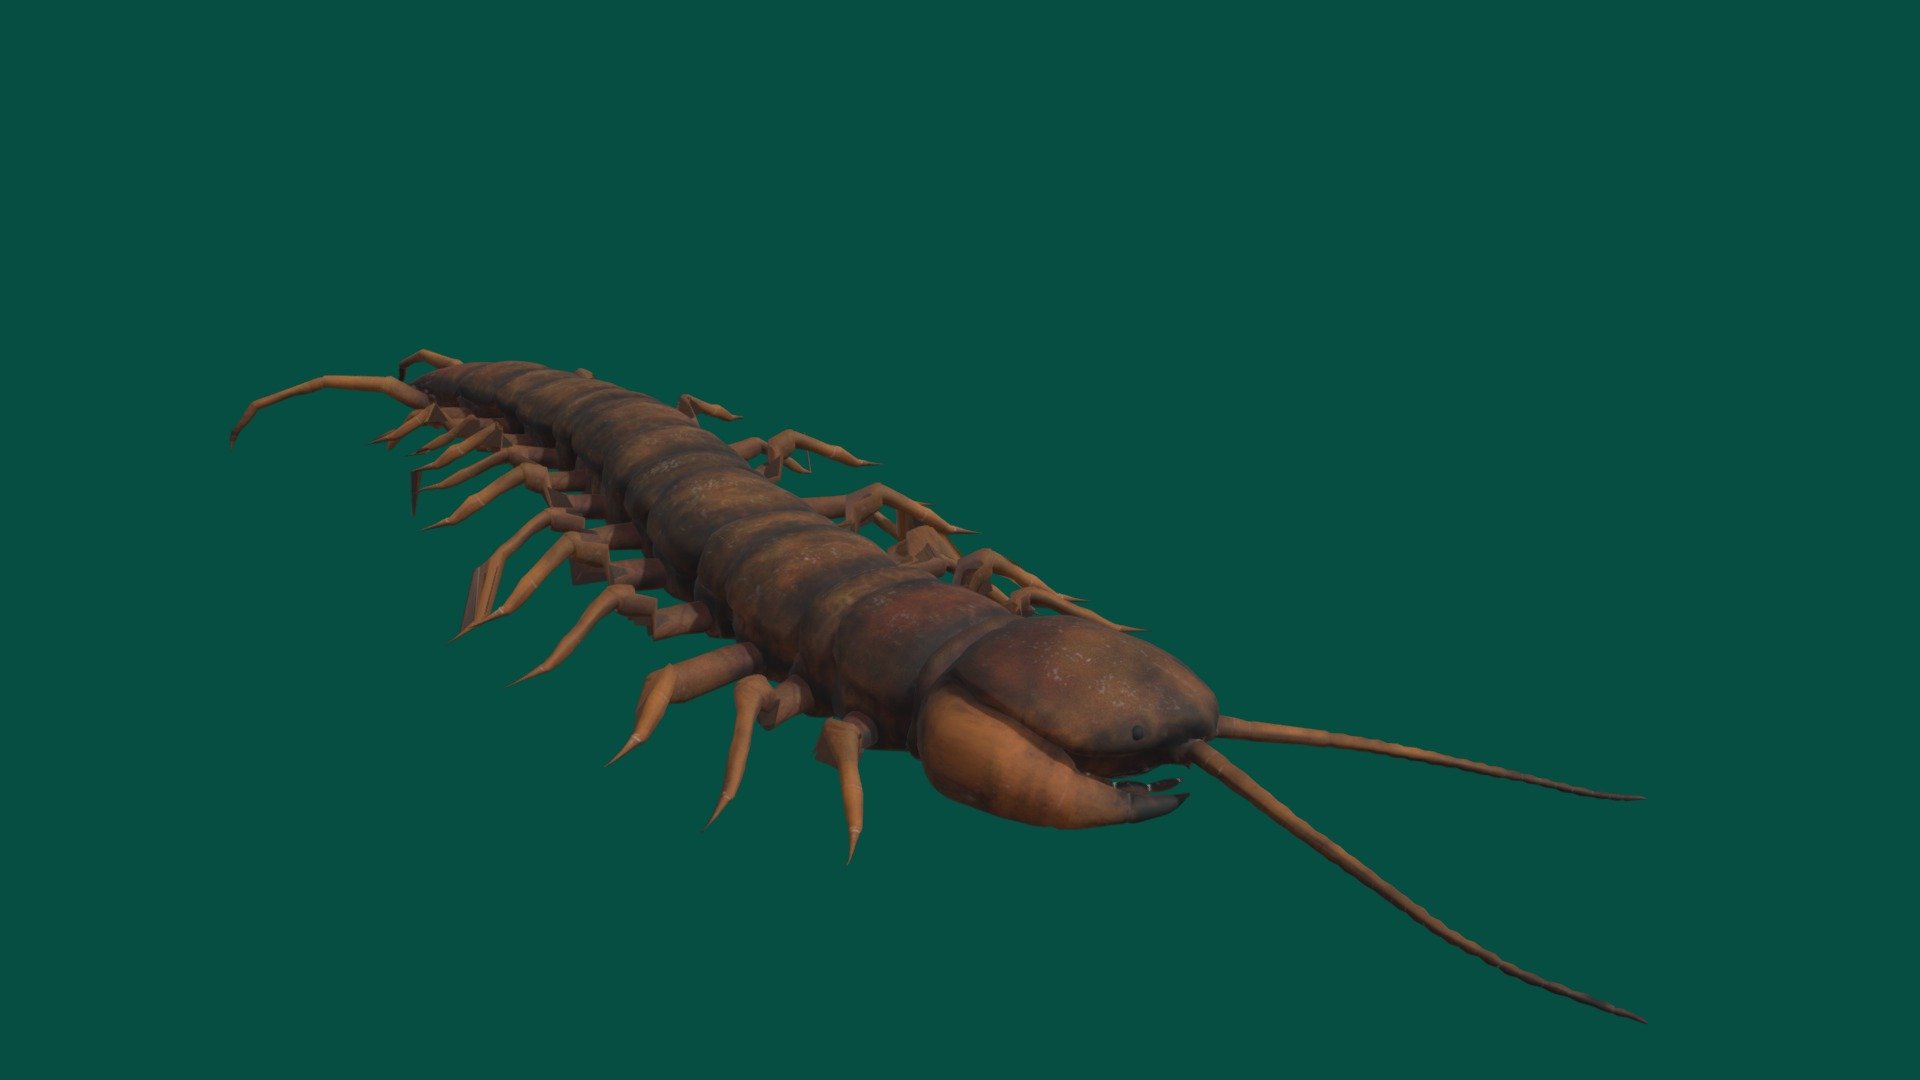 **Test -2 😂 **

Centipedes are predatory arthropods belonging to the class Chilopoda of the subphylum Myriapoda, an arthropod group which also includes millipedes and other multi-legged creatures. Centipedes are elongated metameric creatures with one pair of legs per body segment 3d model